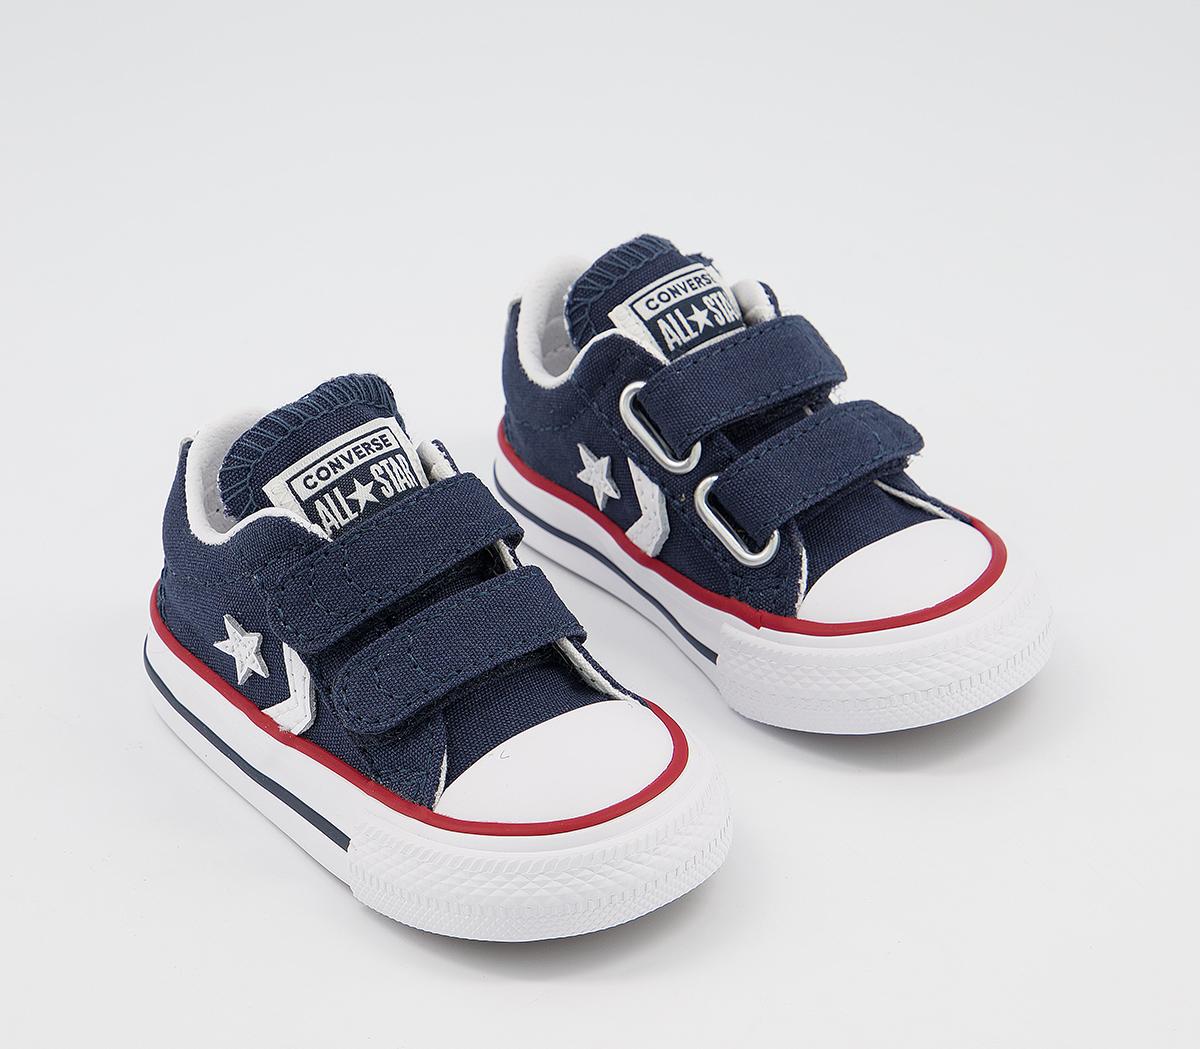 Converse Star Player Infant Trainers Navy White Red - Unisex